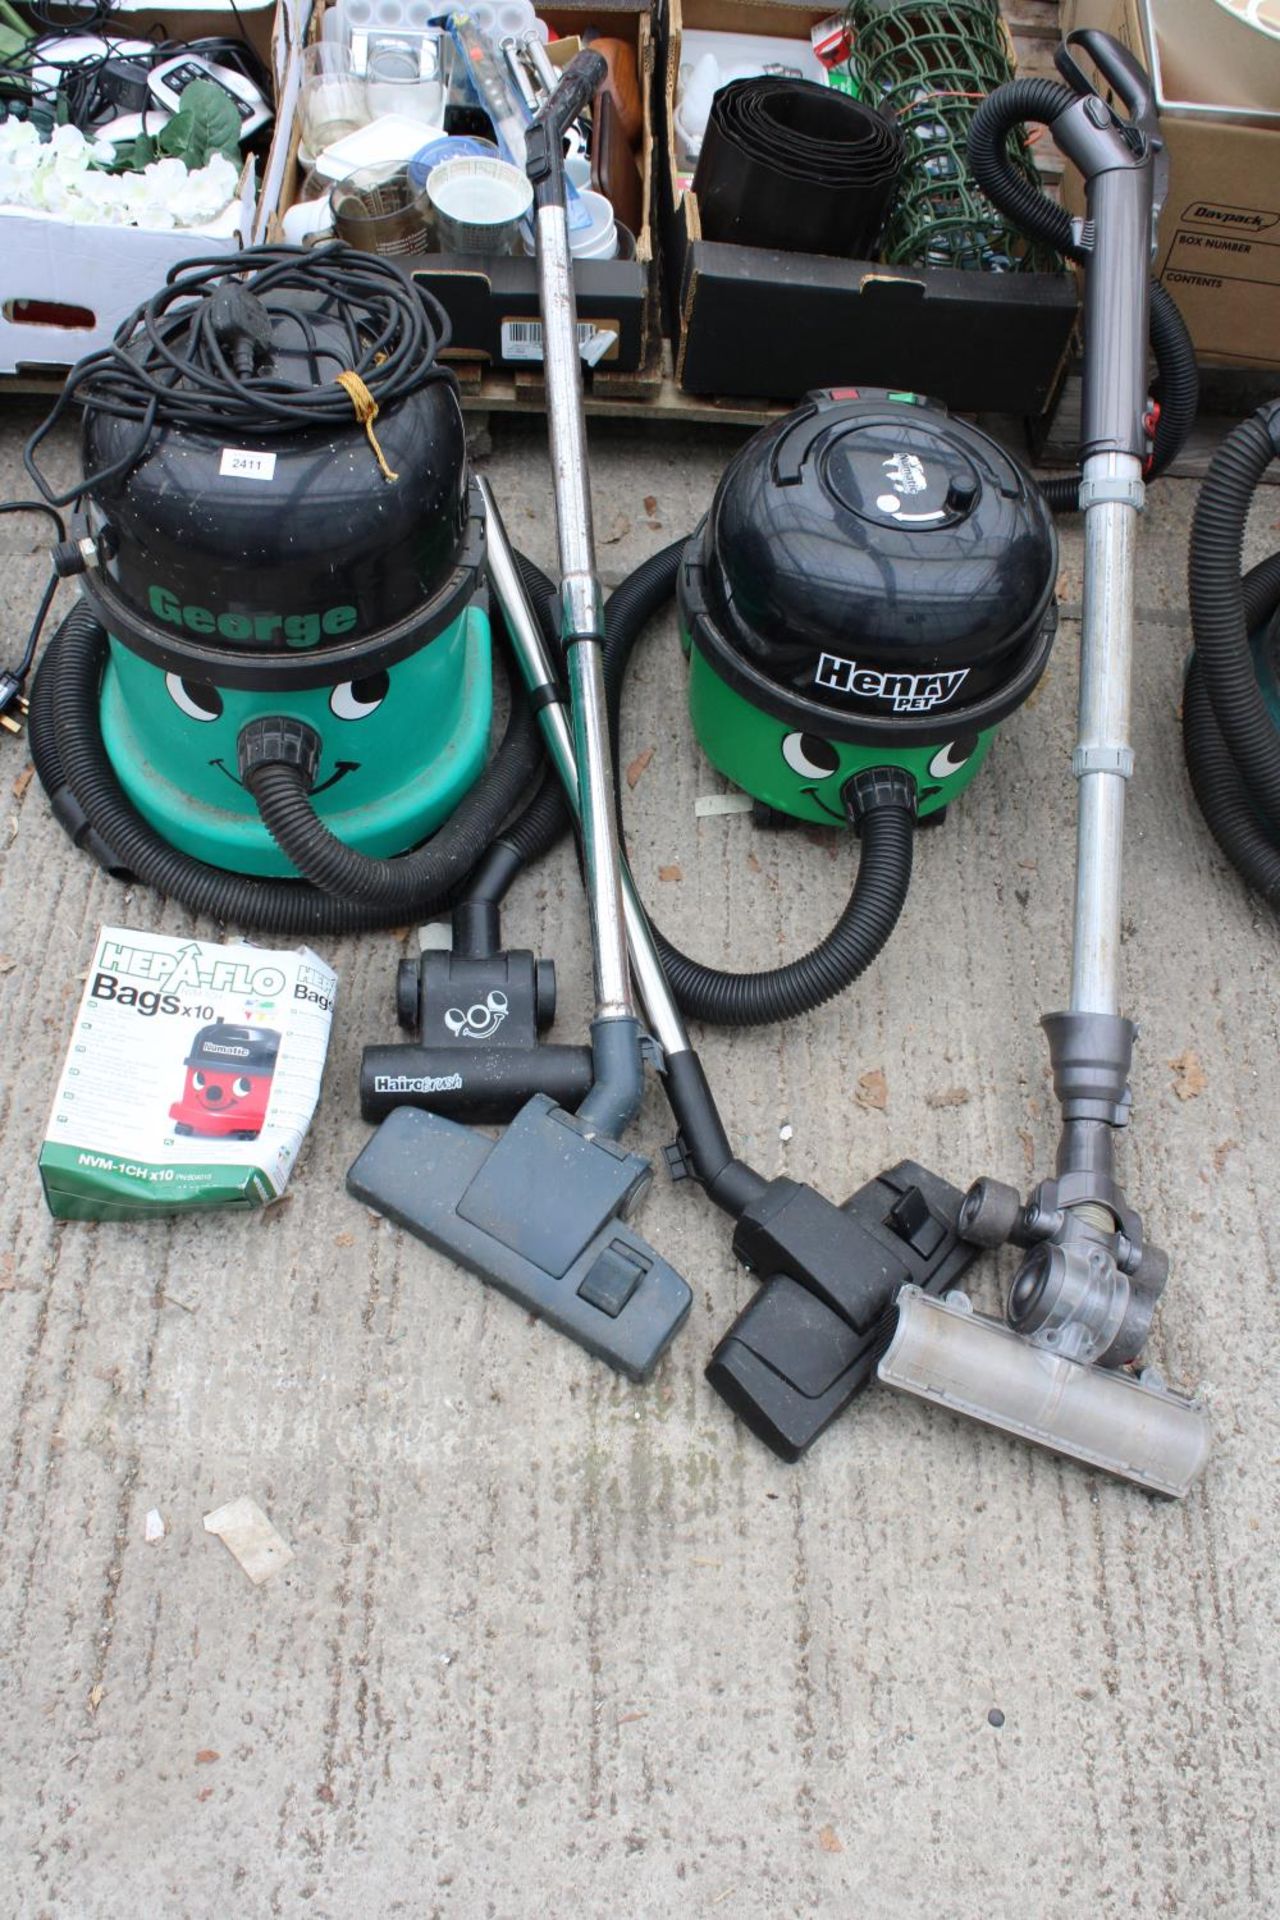 A HENRY PET VACUUM AND A FURTHER GEORGE VACUUM CLEANER